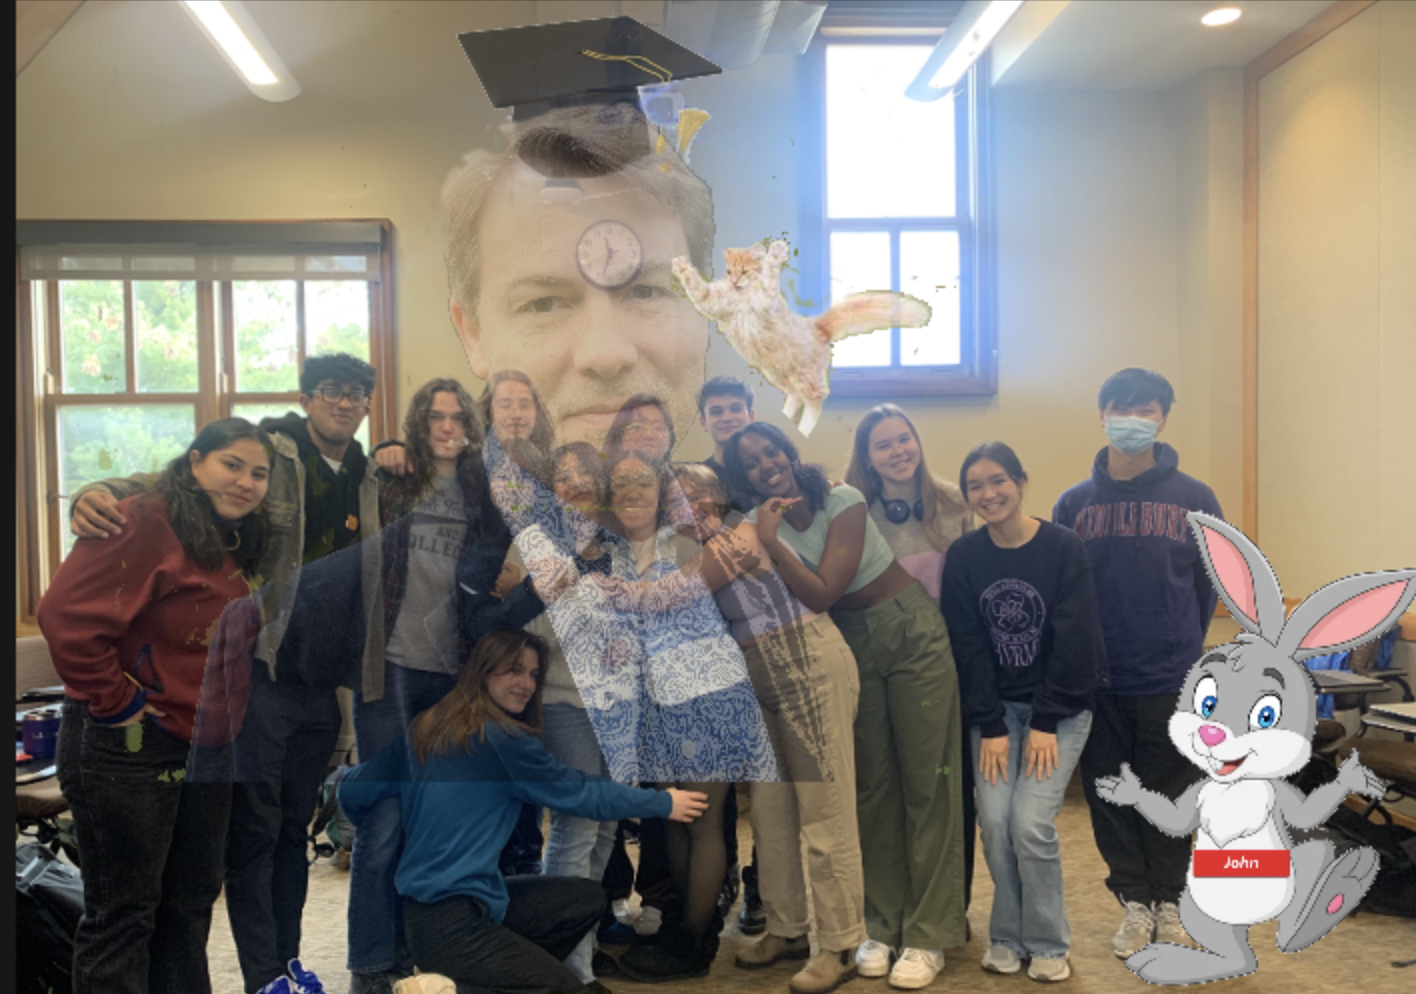 FYS Singing Communities class photo with Jeff Buetner superimposed over it